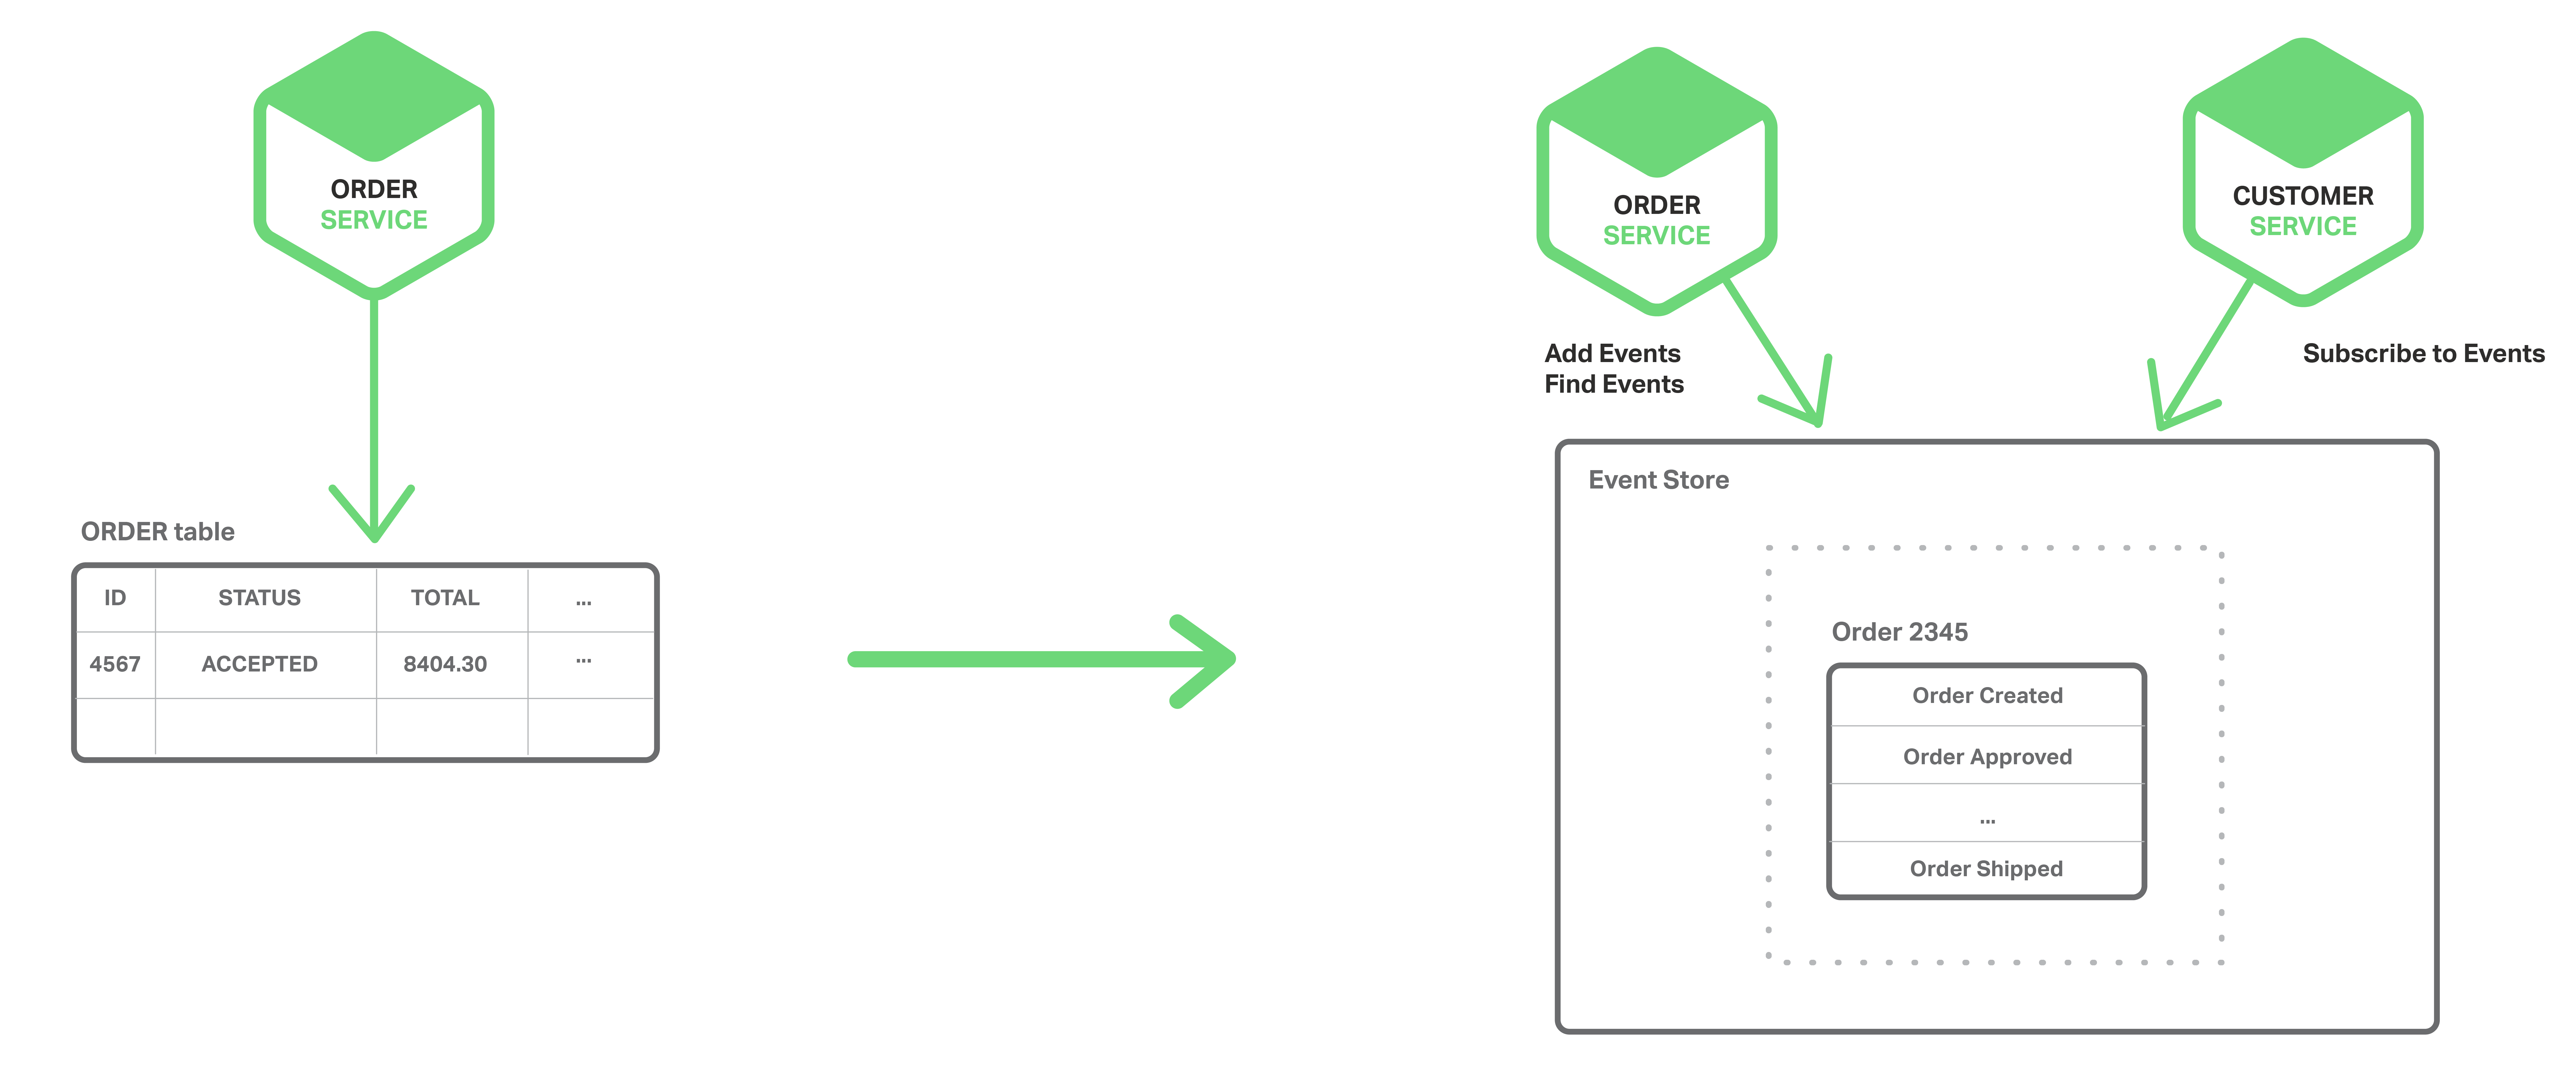 In a microservice architecture, achieve atomicity with event sourcing